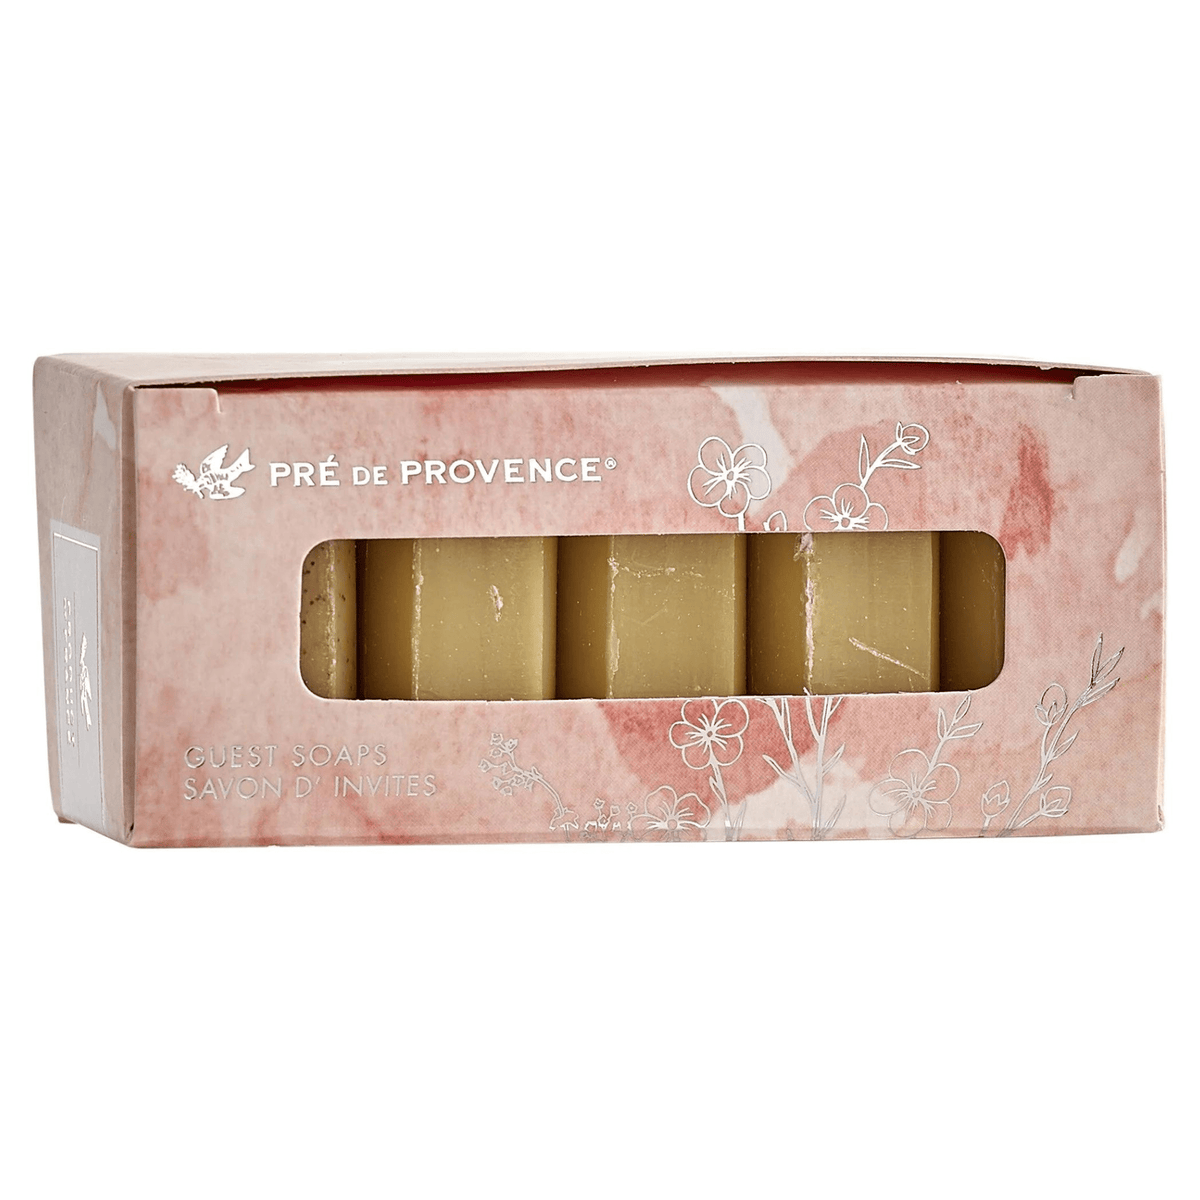 Primary Image of Verbena 5 Pack of Soap